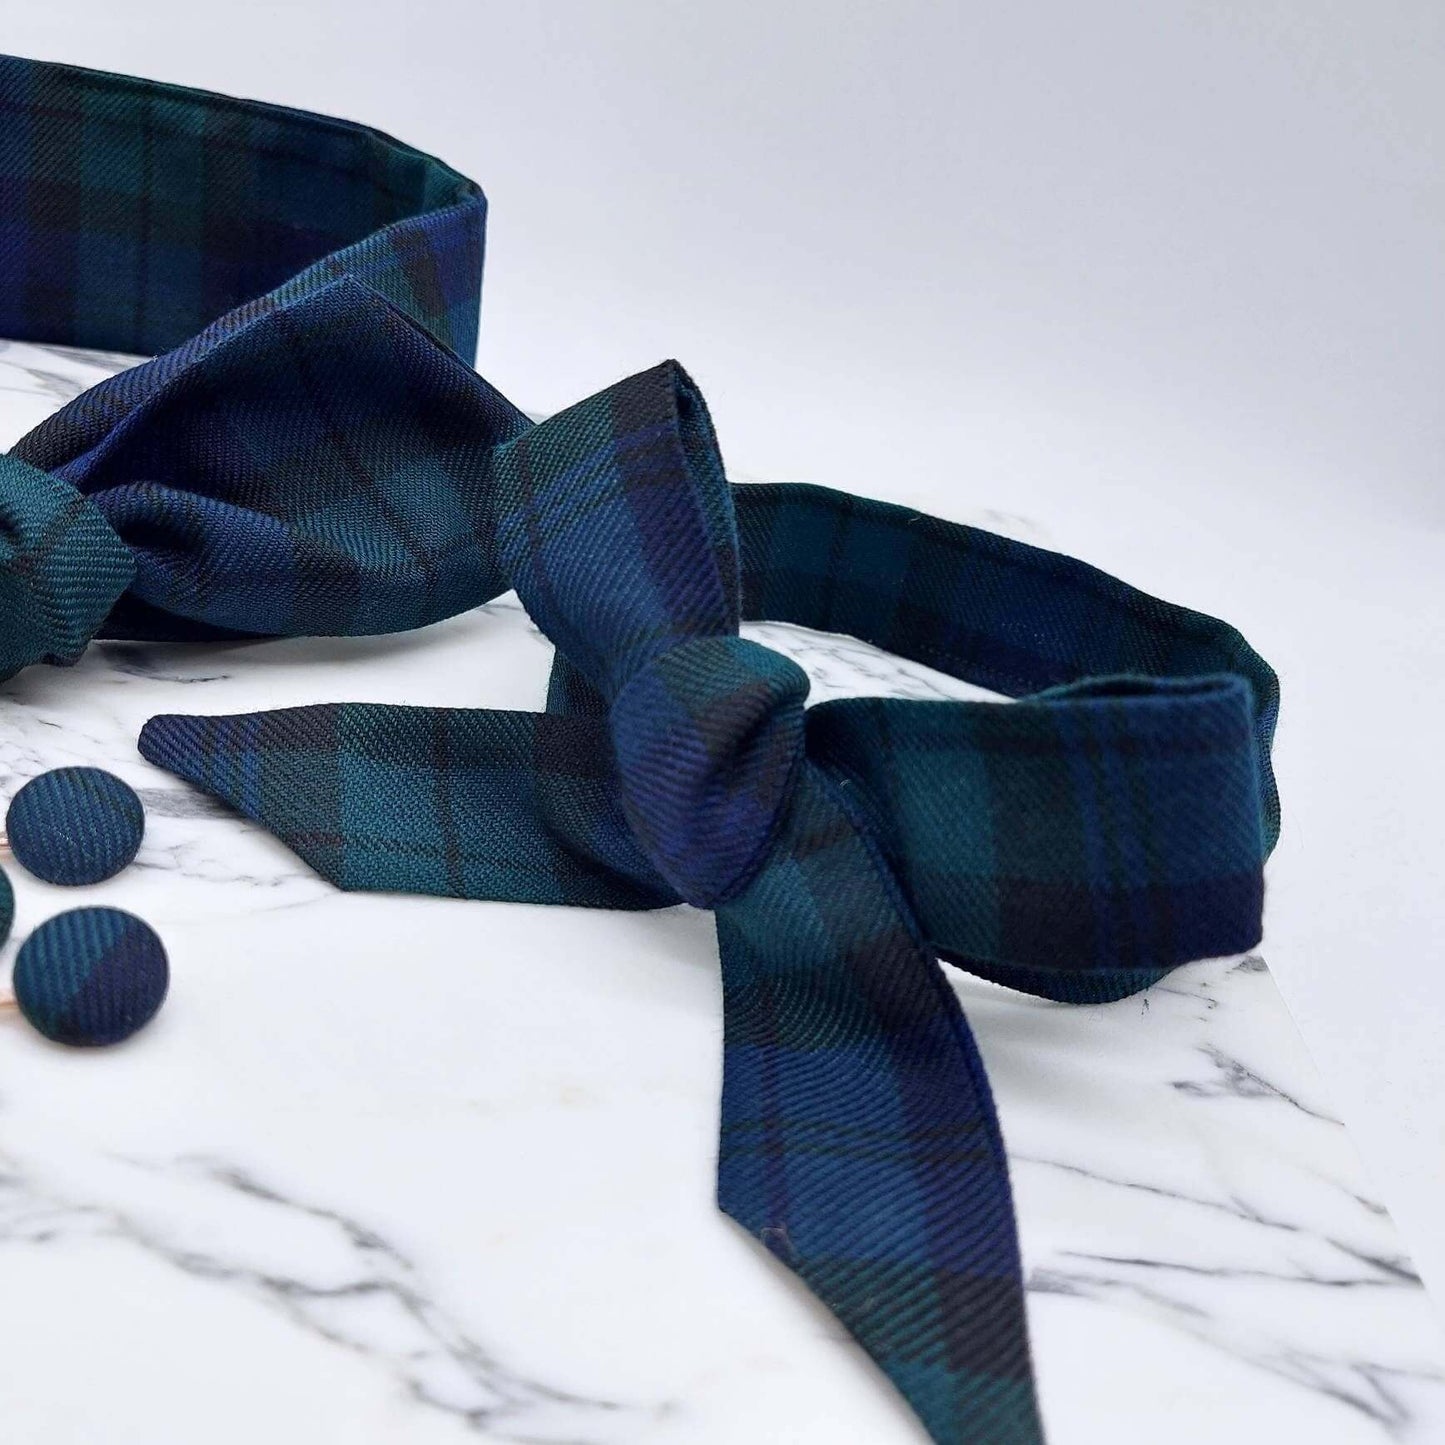 A black and navy blue tartan check fabric, tie headband, tied in a pretty bow.